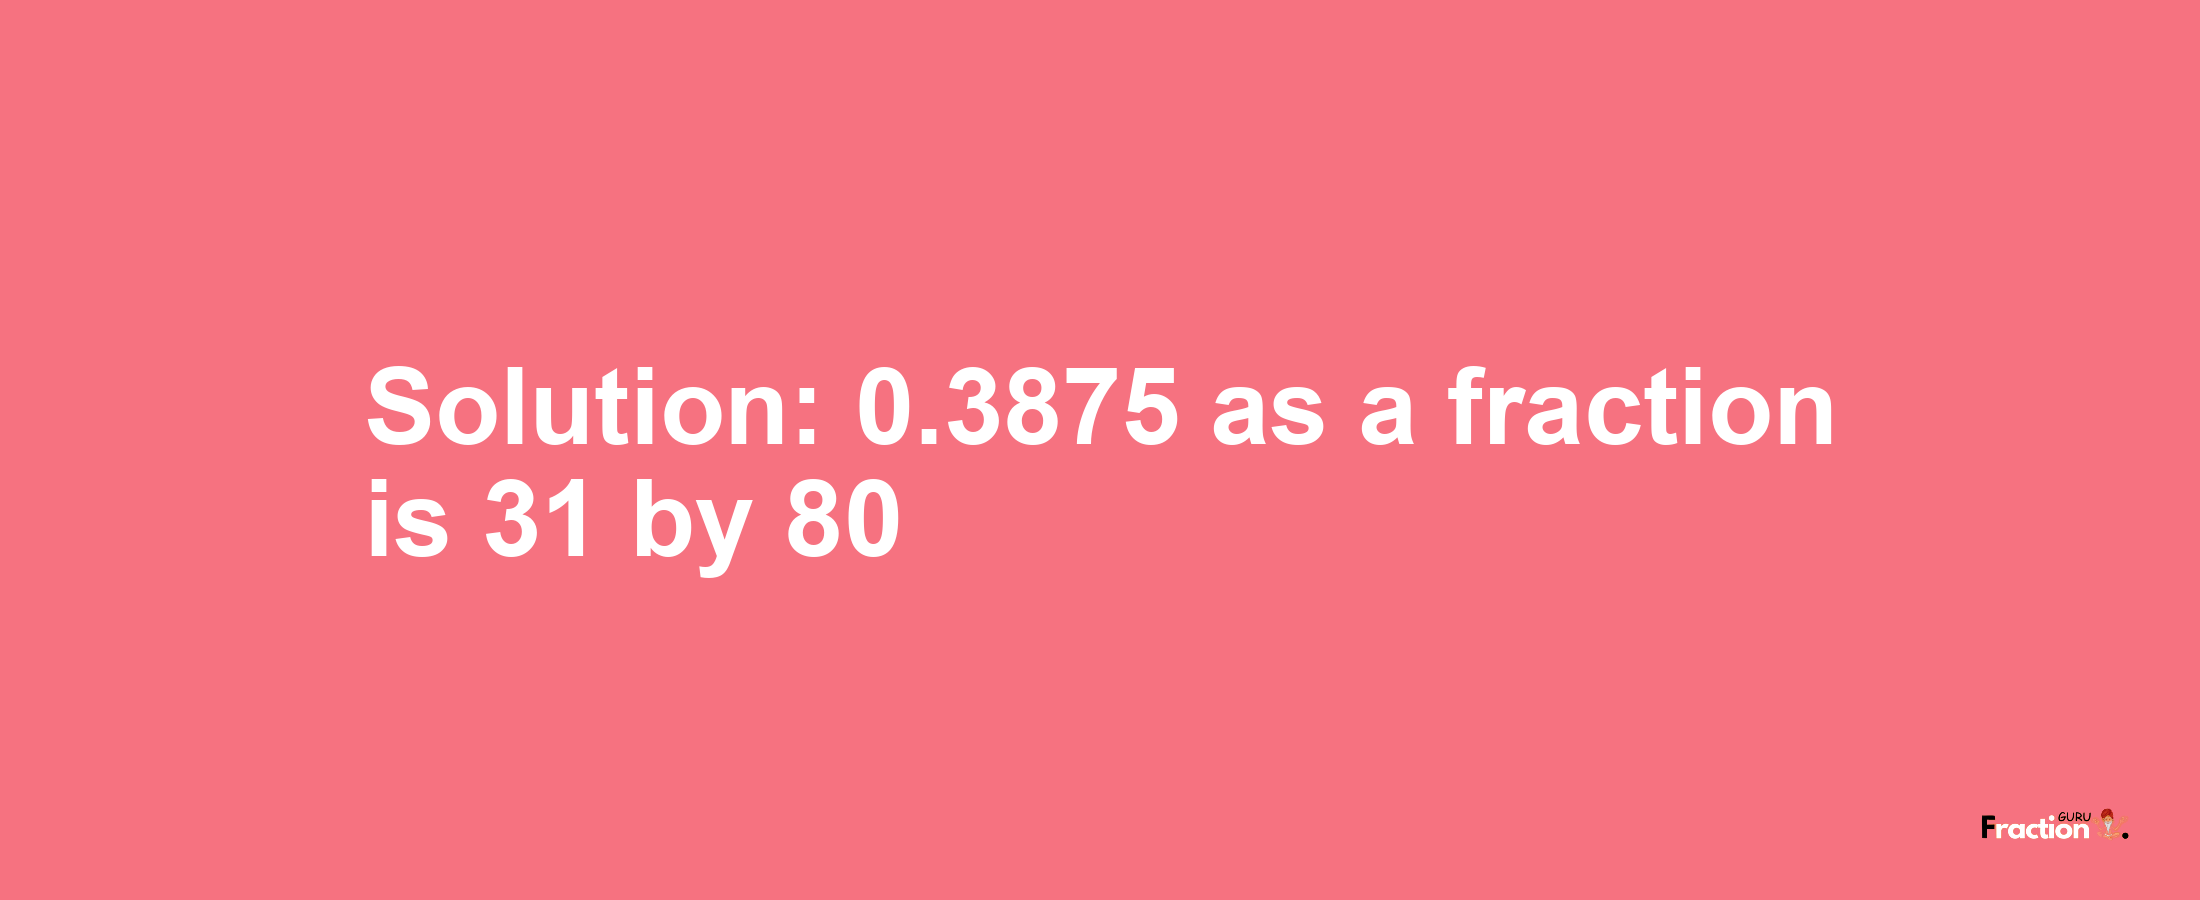 Solution:0.3875 as a fraction is 31/80